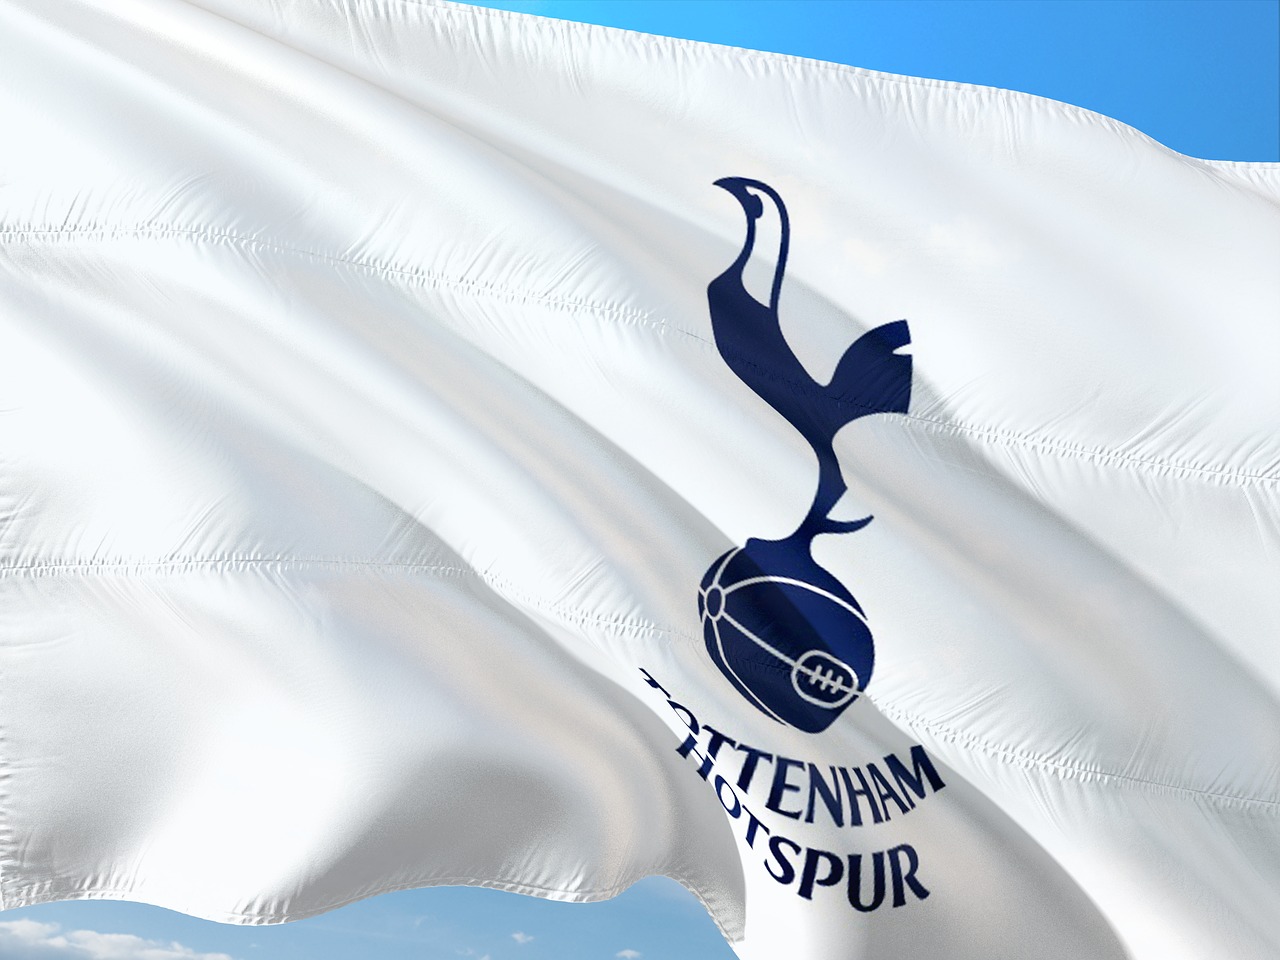 Tottenham Hotspur forgotten man agrees to join Mexican team